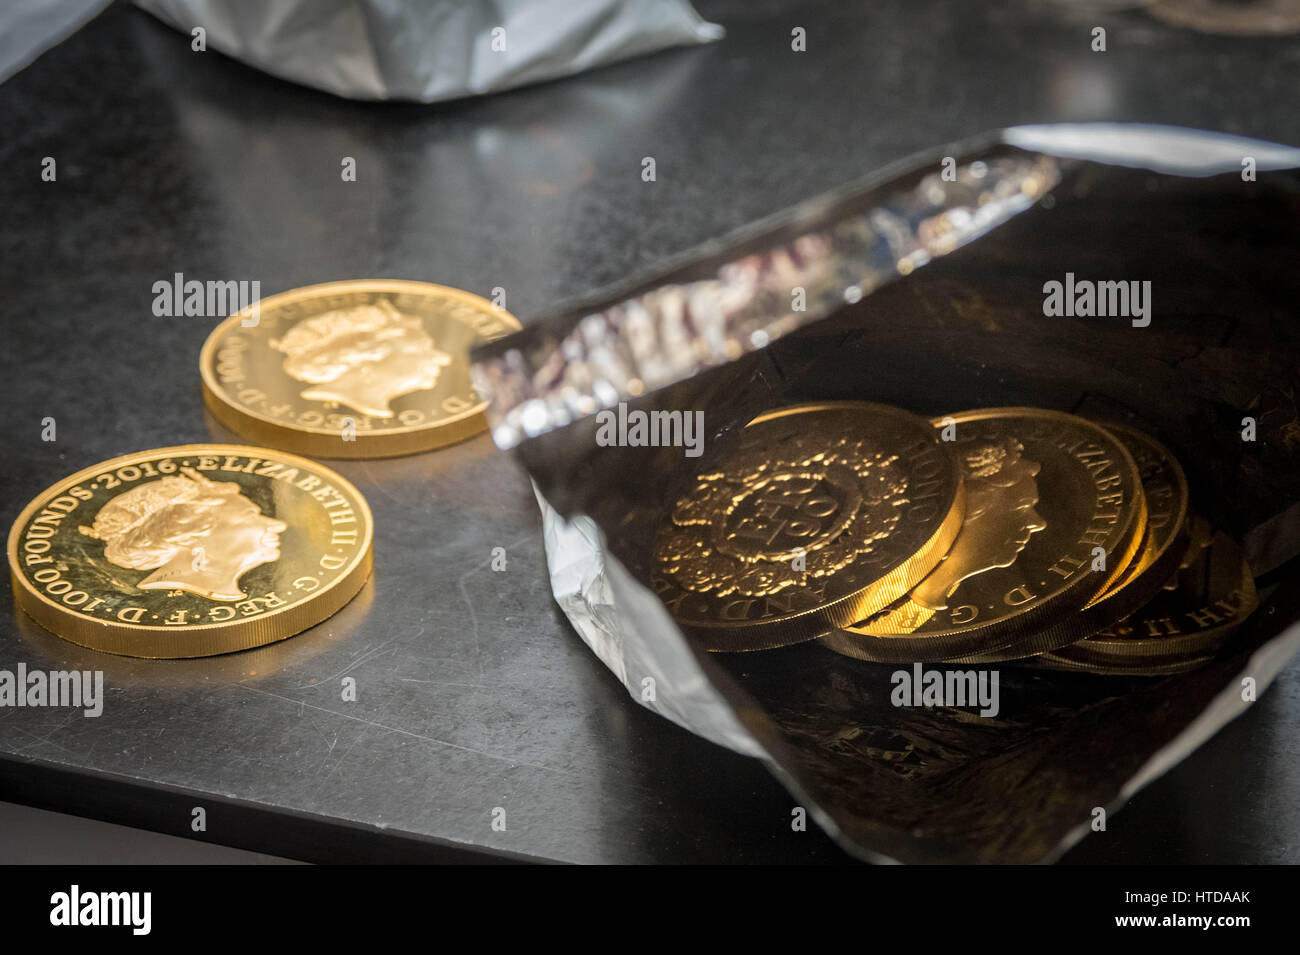 As well as standard 20p, 50p, £1, and £2 coins, the London Assay office also tests commemorative coins in their Laboratory at The Goldsmiths' Company Assay Office. Seen here a mix of gold proof sovereign coins. Stock Photo